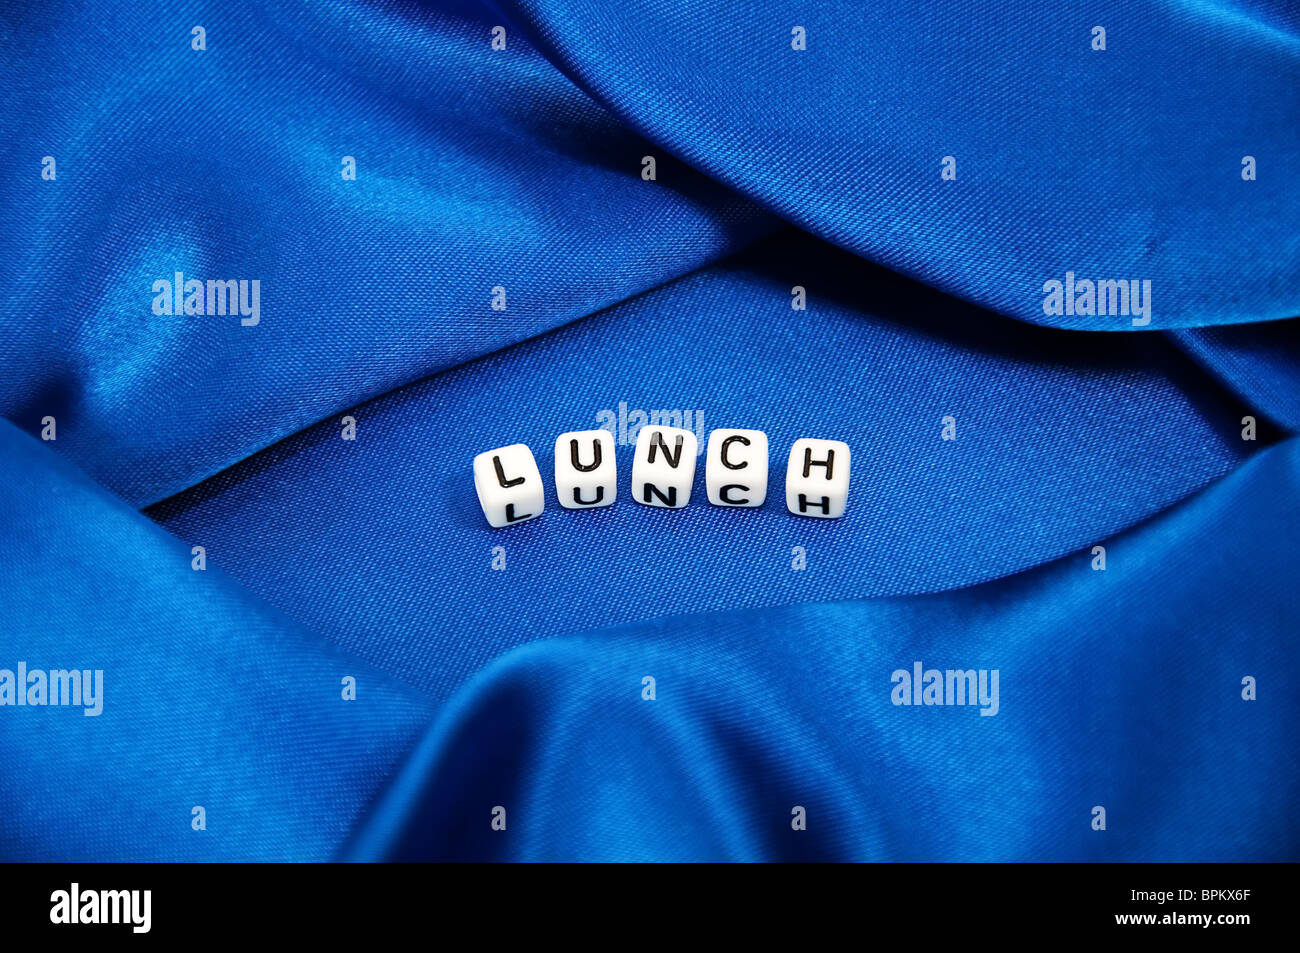 Royal blue satin background with rich folds and wrinkles for texture is the word lunch in black and white cube lettering series. Stock Photo